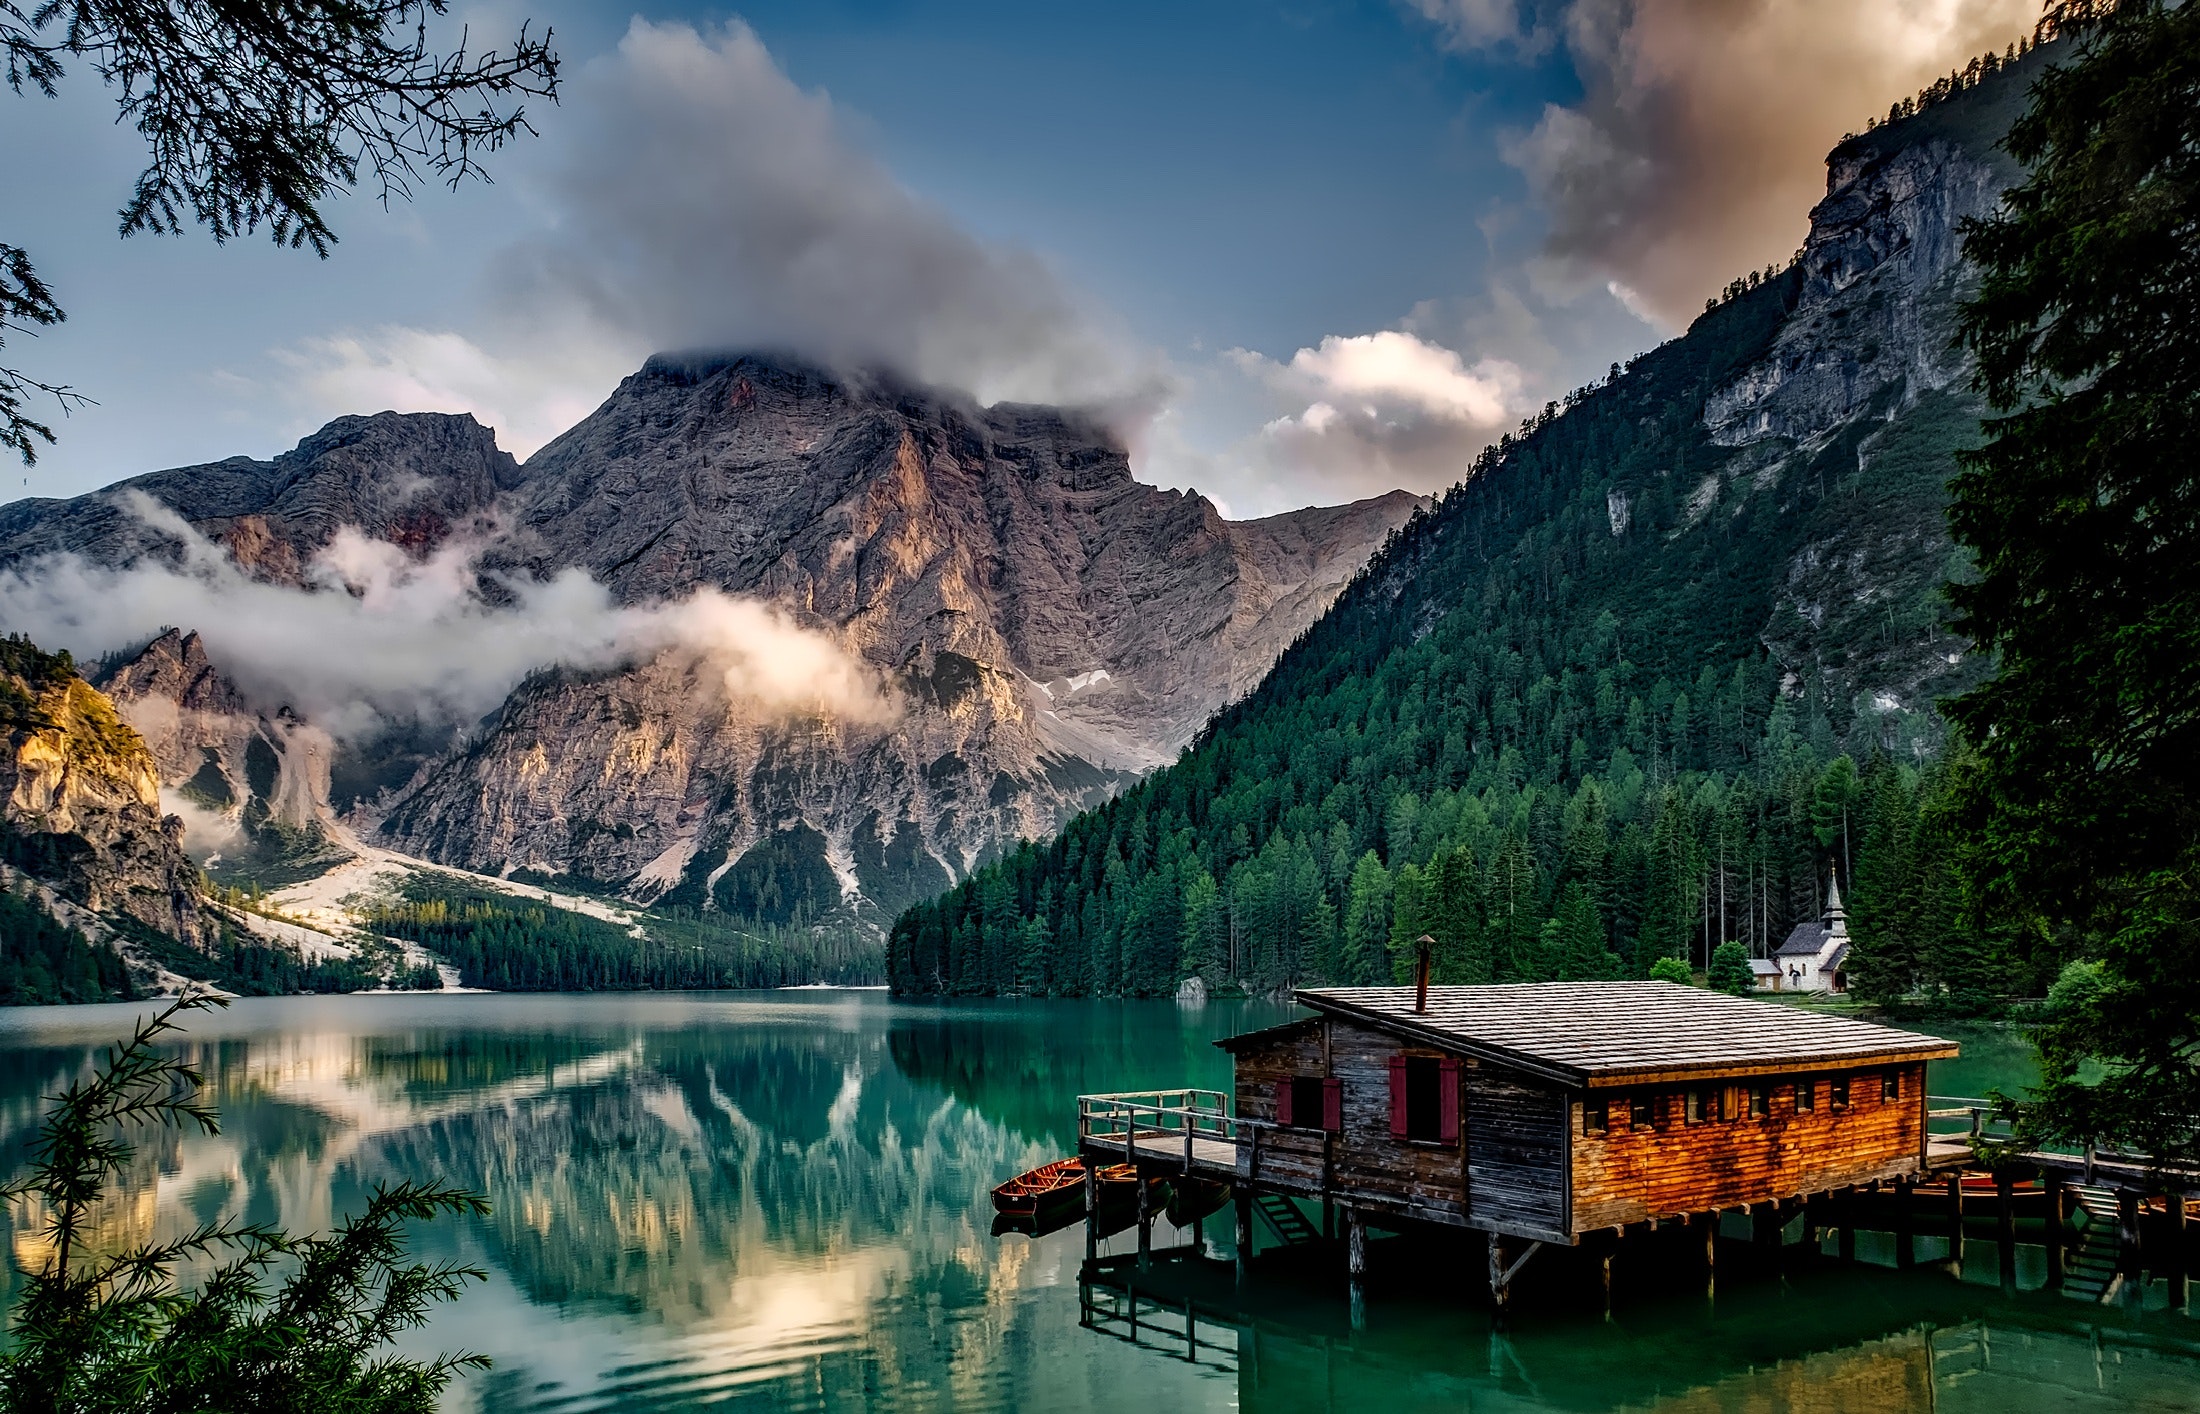 Mirror lake reflecting wooden house in middle of lake overlooking mountain ranges photo